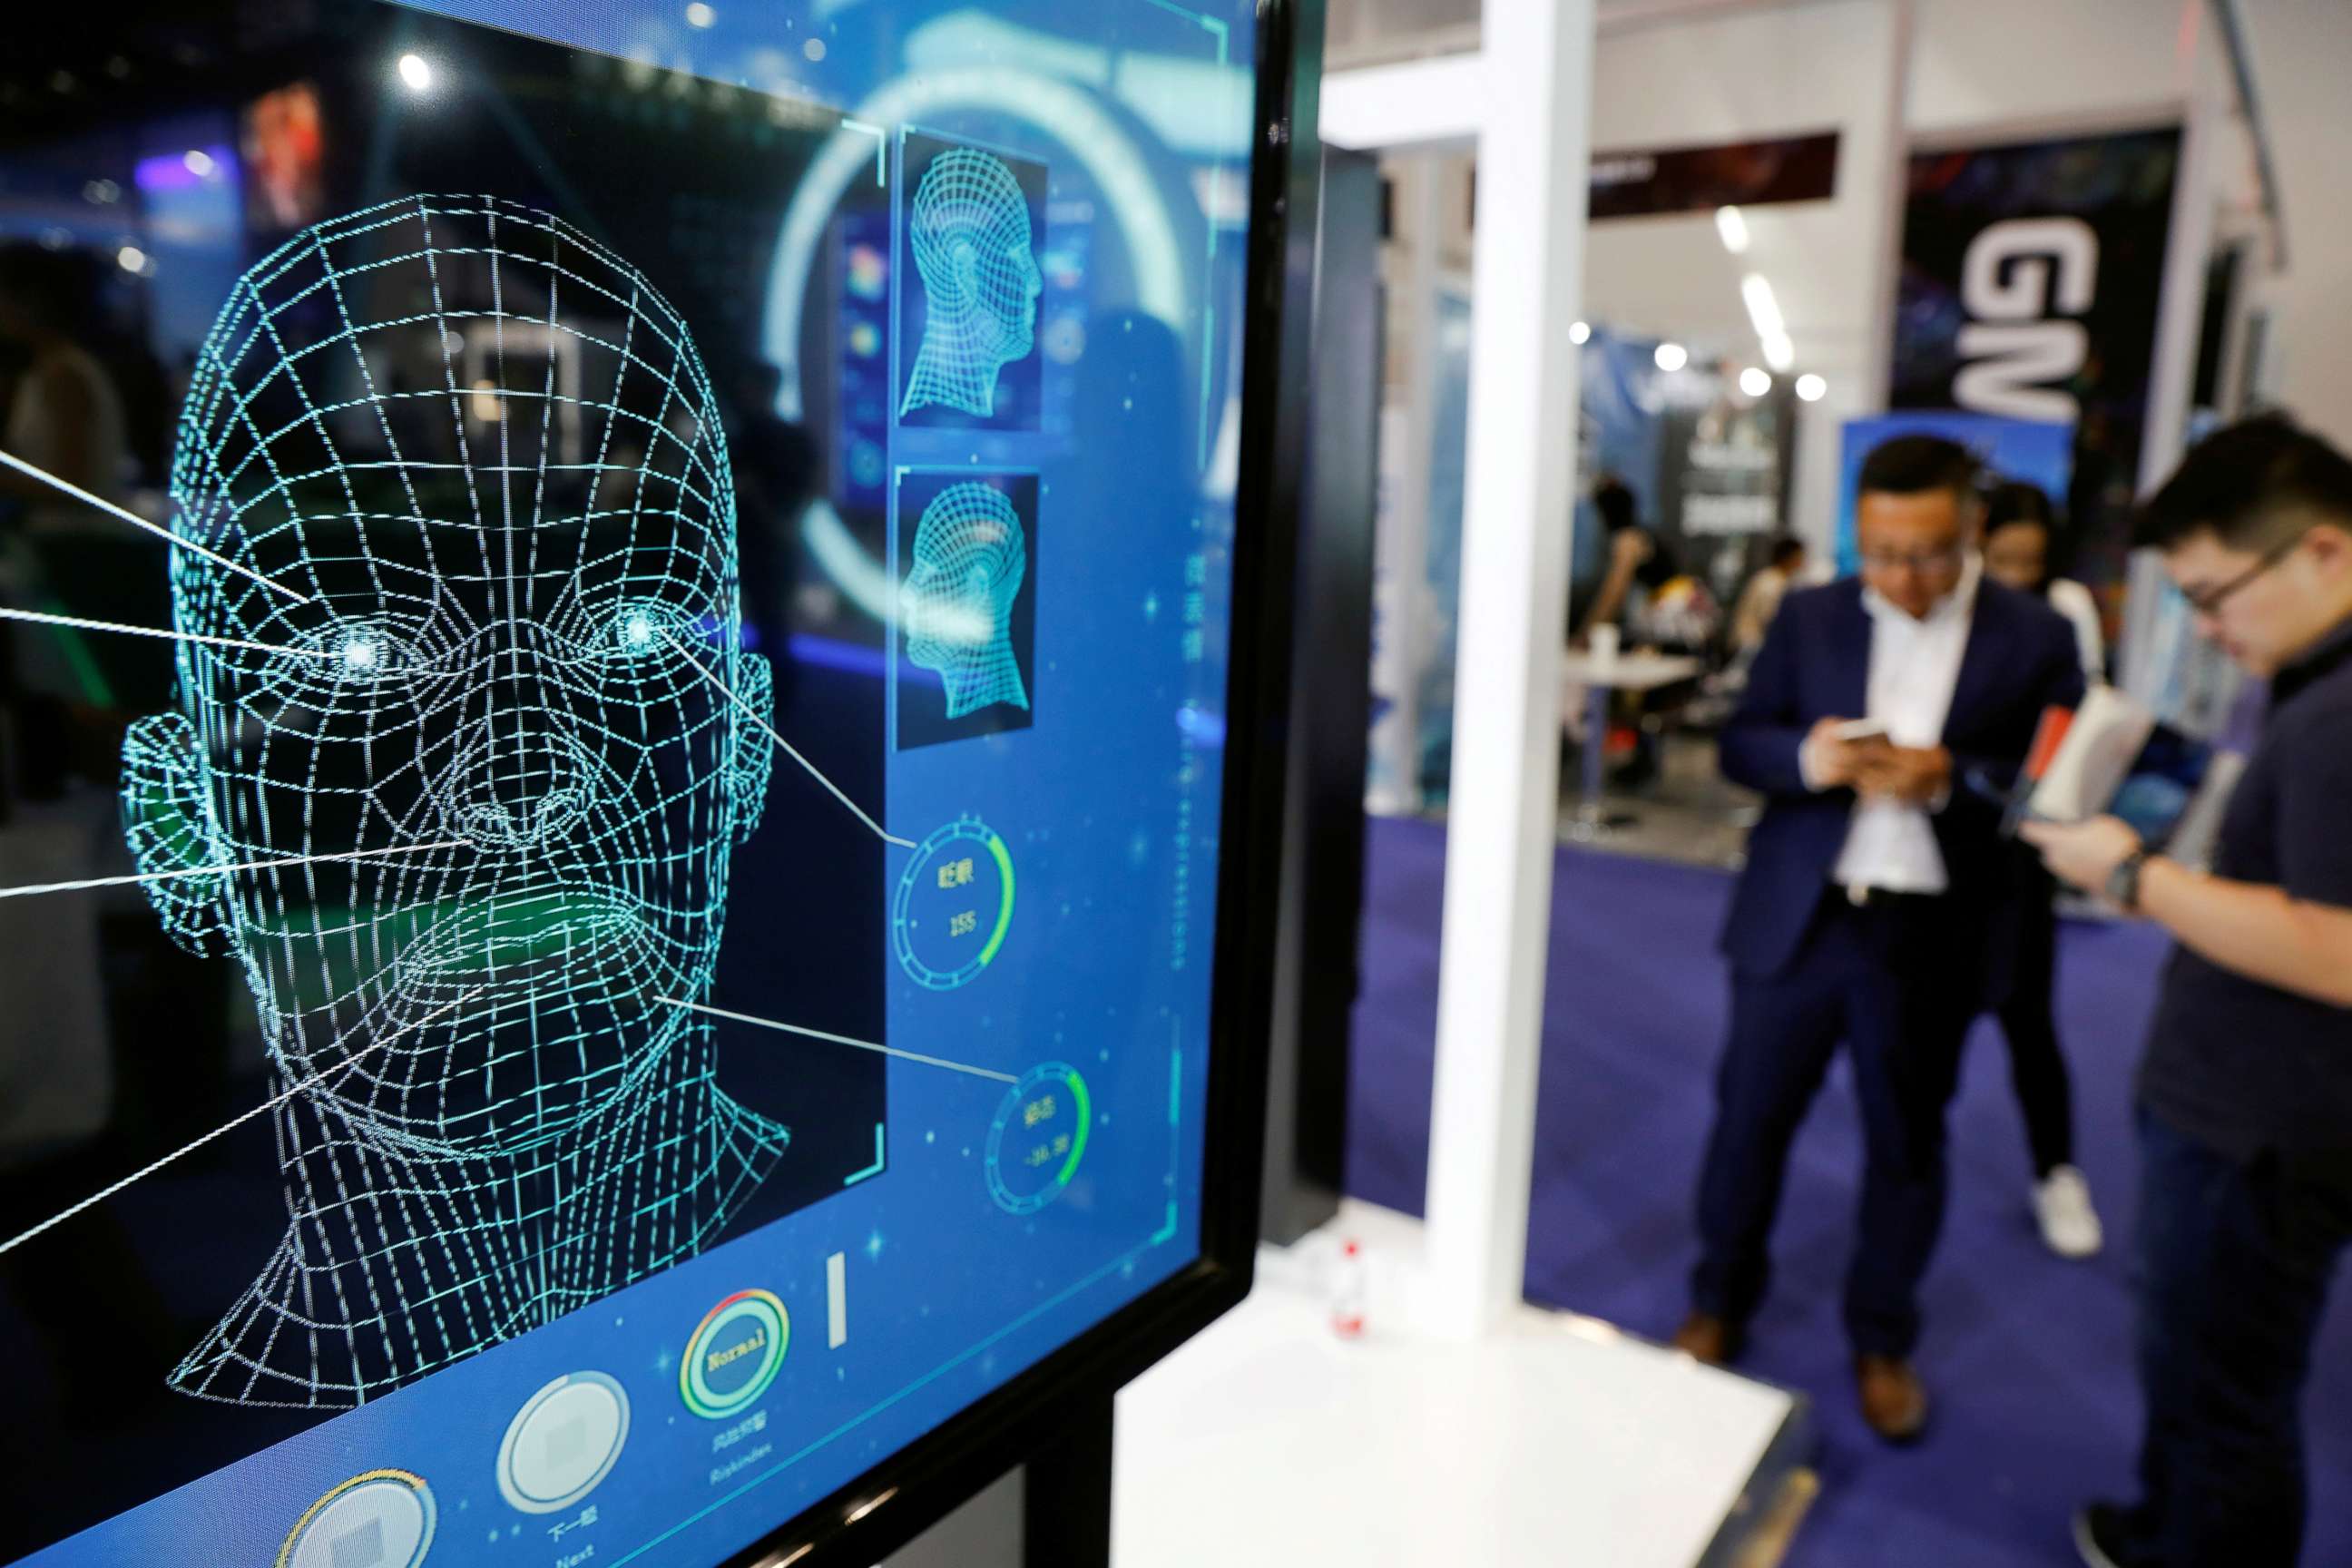 PHOTO: Visitors check their phones behind the screen advertising facial recognition software during Global Mobile Internet Conference (GMIC) at the National Convention in Beijing, Aril 27, 2018.